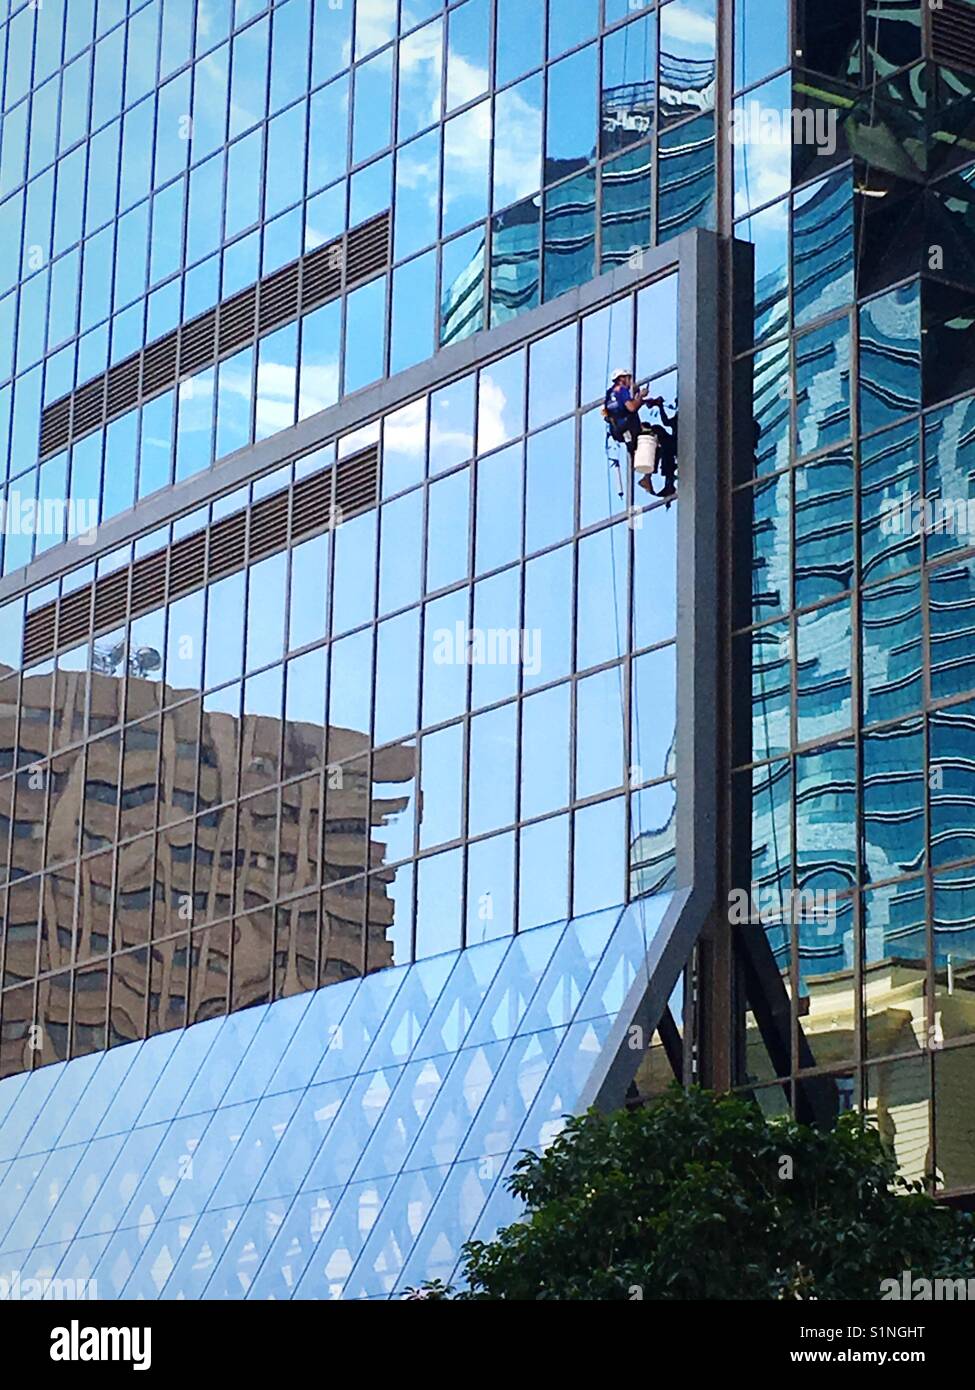 Window cleaner hanging on the side of a building Stock Photo